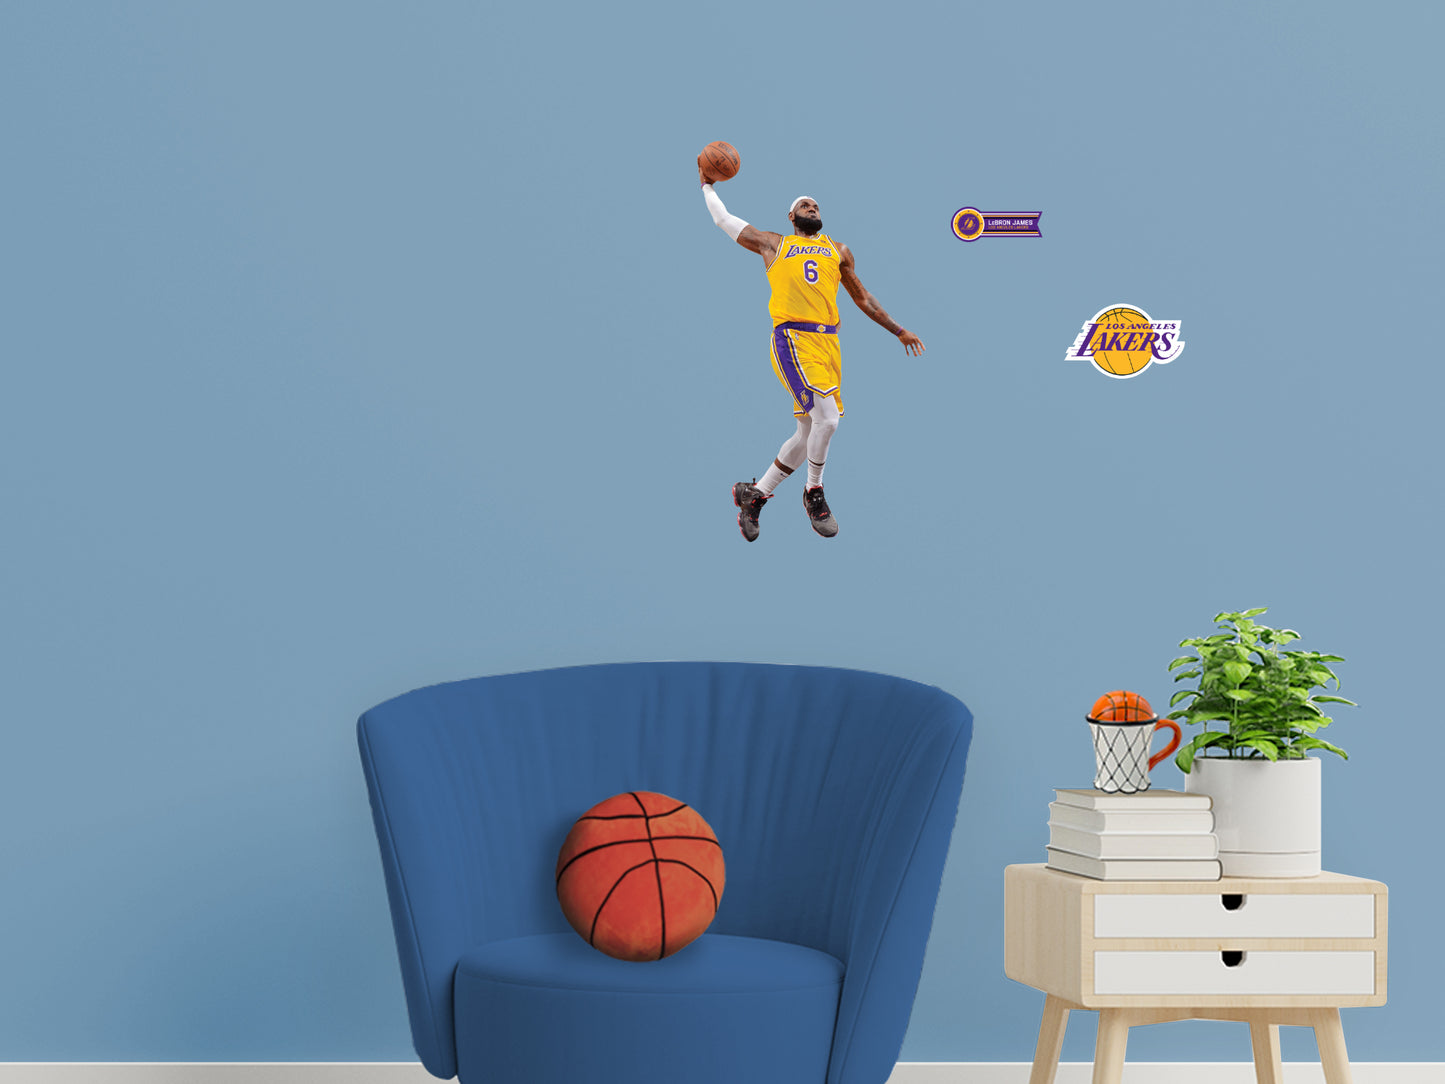 Los Angeles Lakers: LeBron James  Dunk        - Officially Licensed NBA Removable     Adhesive Decal